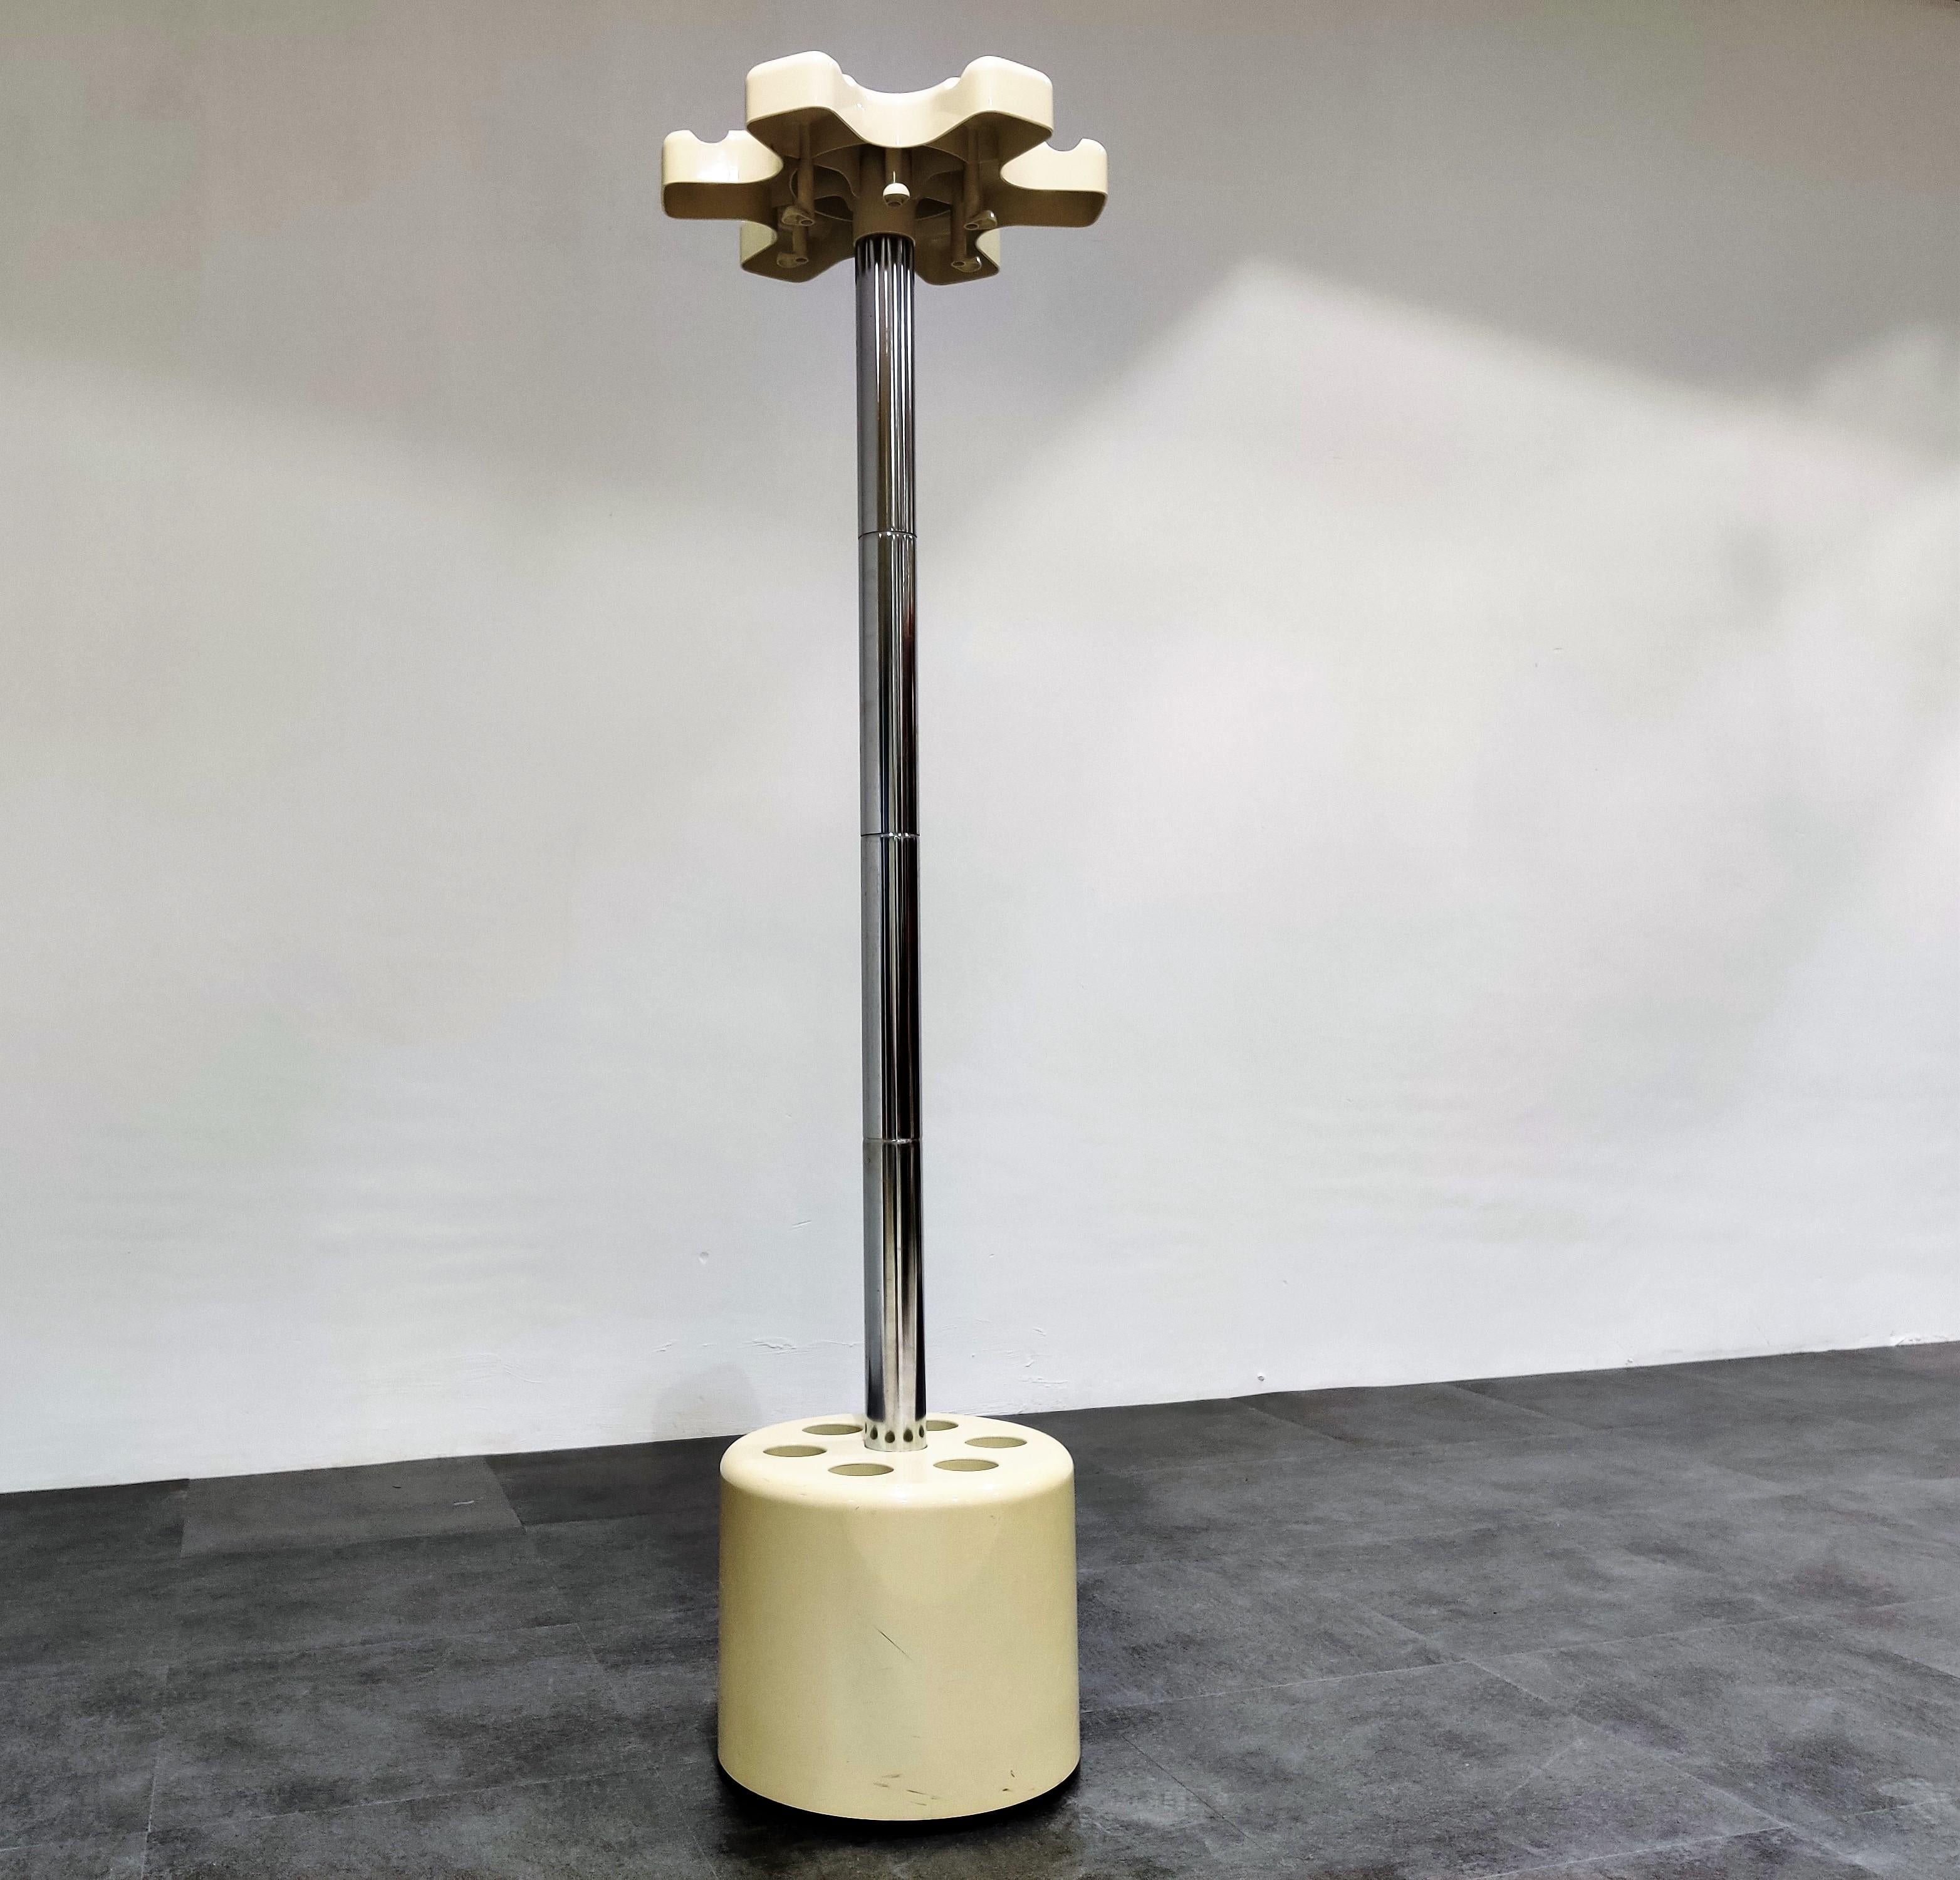 Lovely space age design coat stand by Roberto Lucci & Paolo Orlandini for Velca.

Beautiful period piece with 6 hooks and an umbrella holder for six umbrellas are walking sticks, etc.

1960s - Italy

Good condition.

Dimensions:
Height